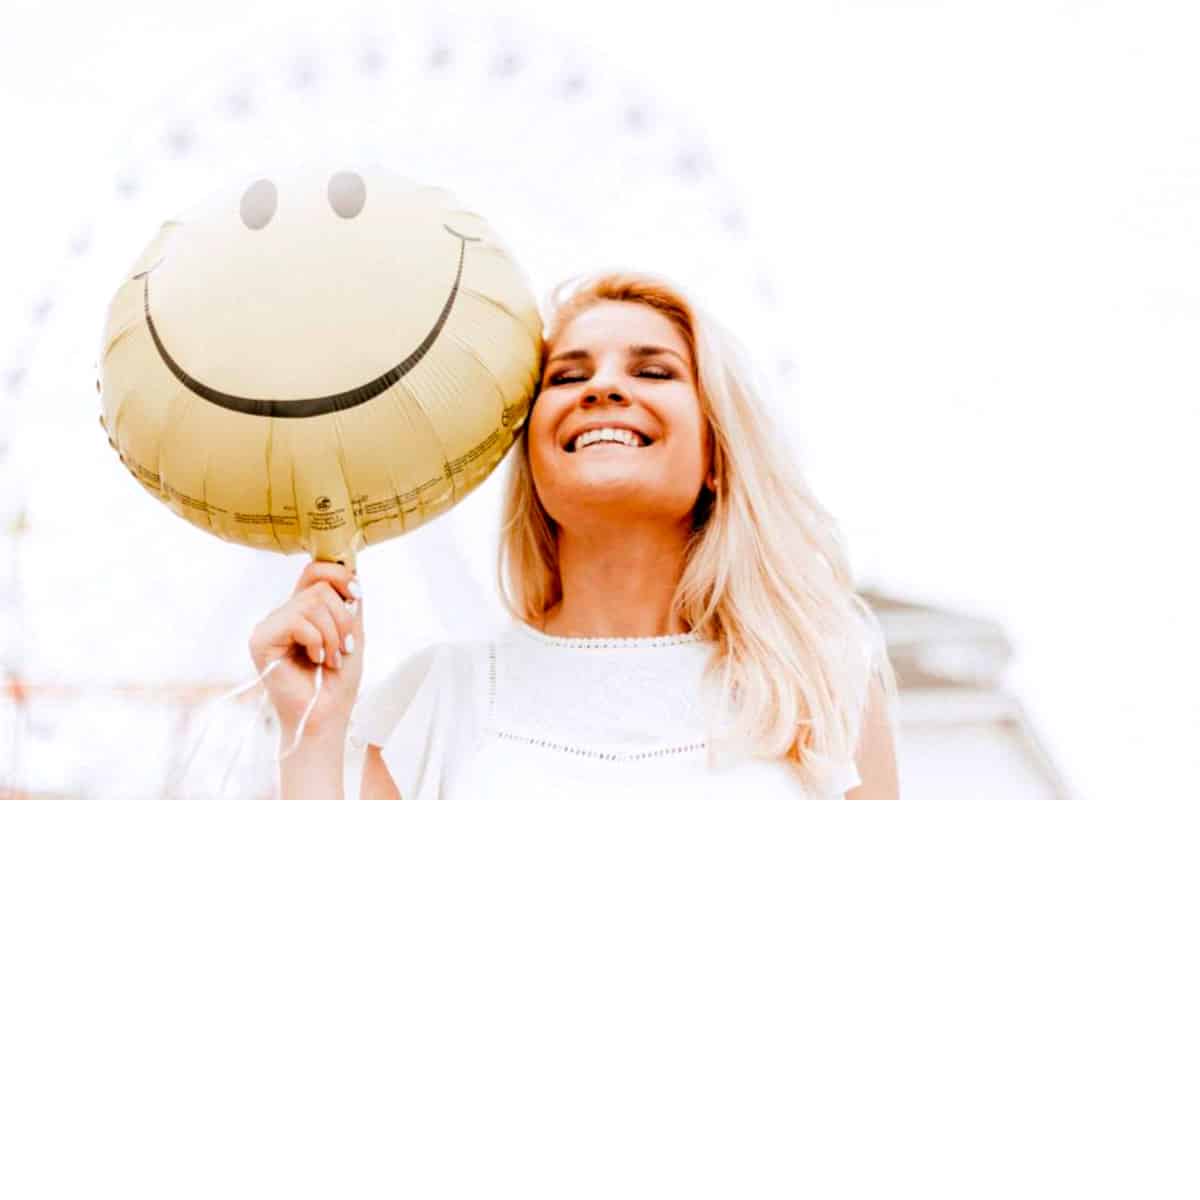 a woman smiling while holding a smiley face balloon